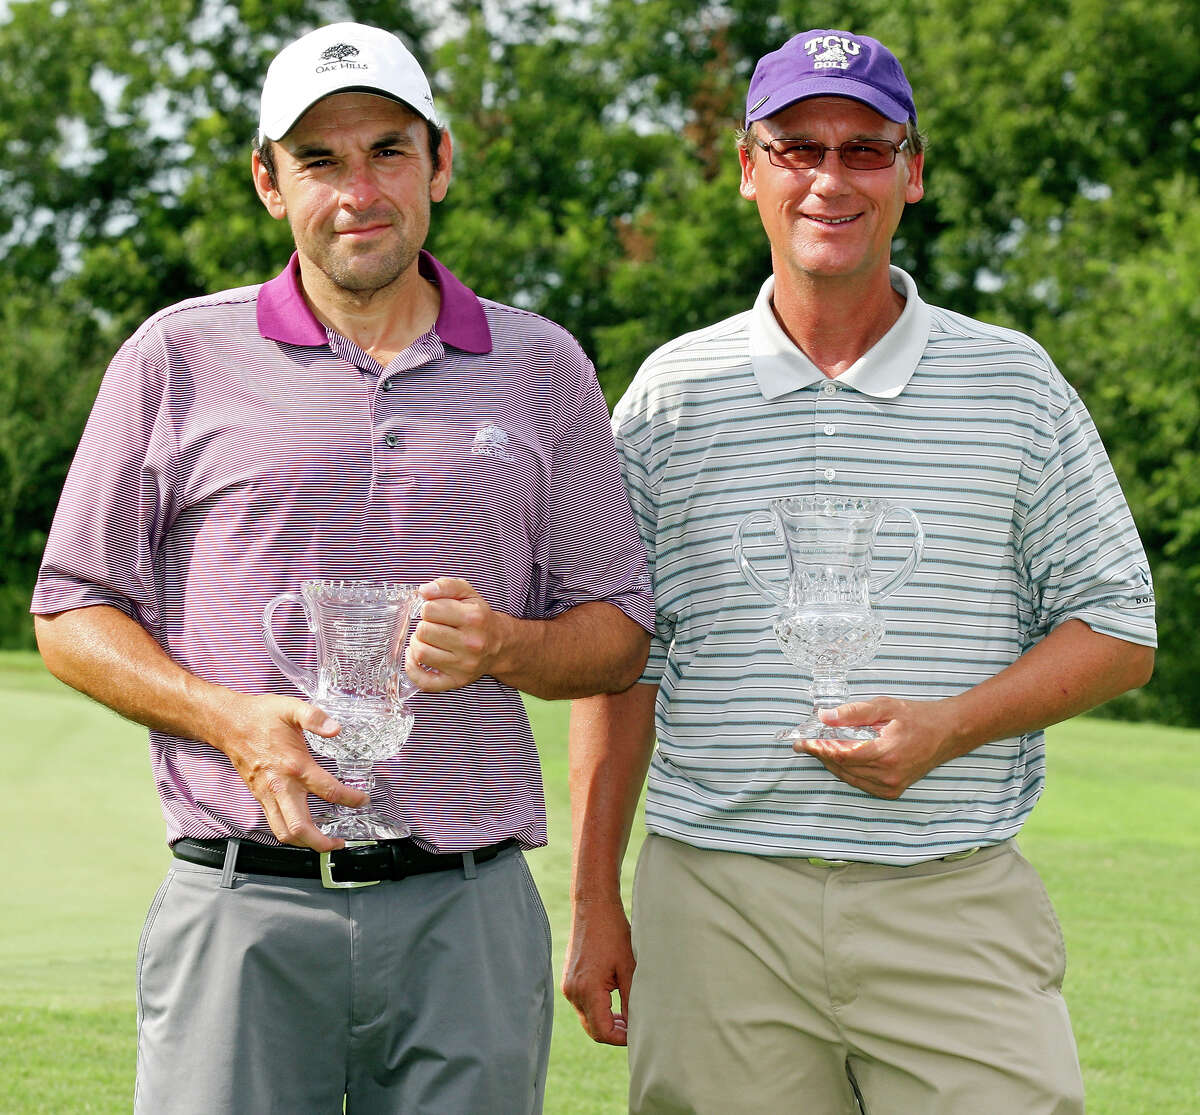 Ed Sanchez (left) and Bobby Baugh pose for photos with their trophies after the Greater San Antonio Match Play Championship finals Sunday July 15, 2012 at Willow Springs Golf Course. Sanchez won the men's division and Baugh won the senior men's division.